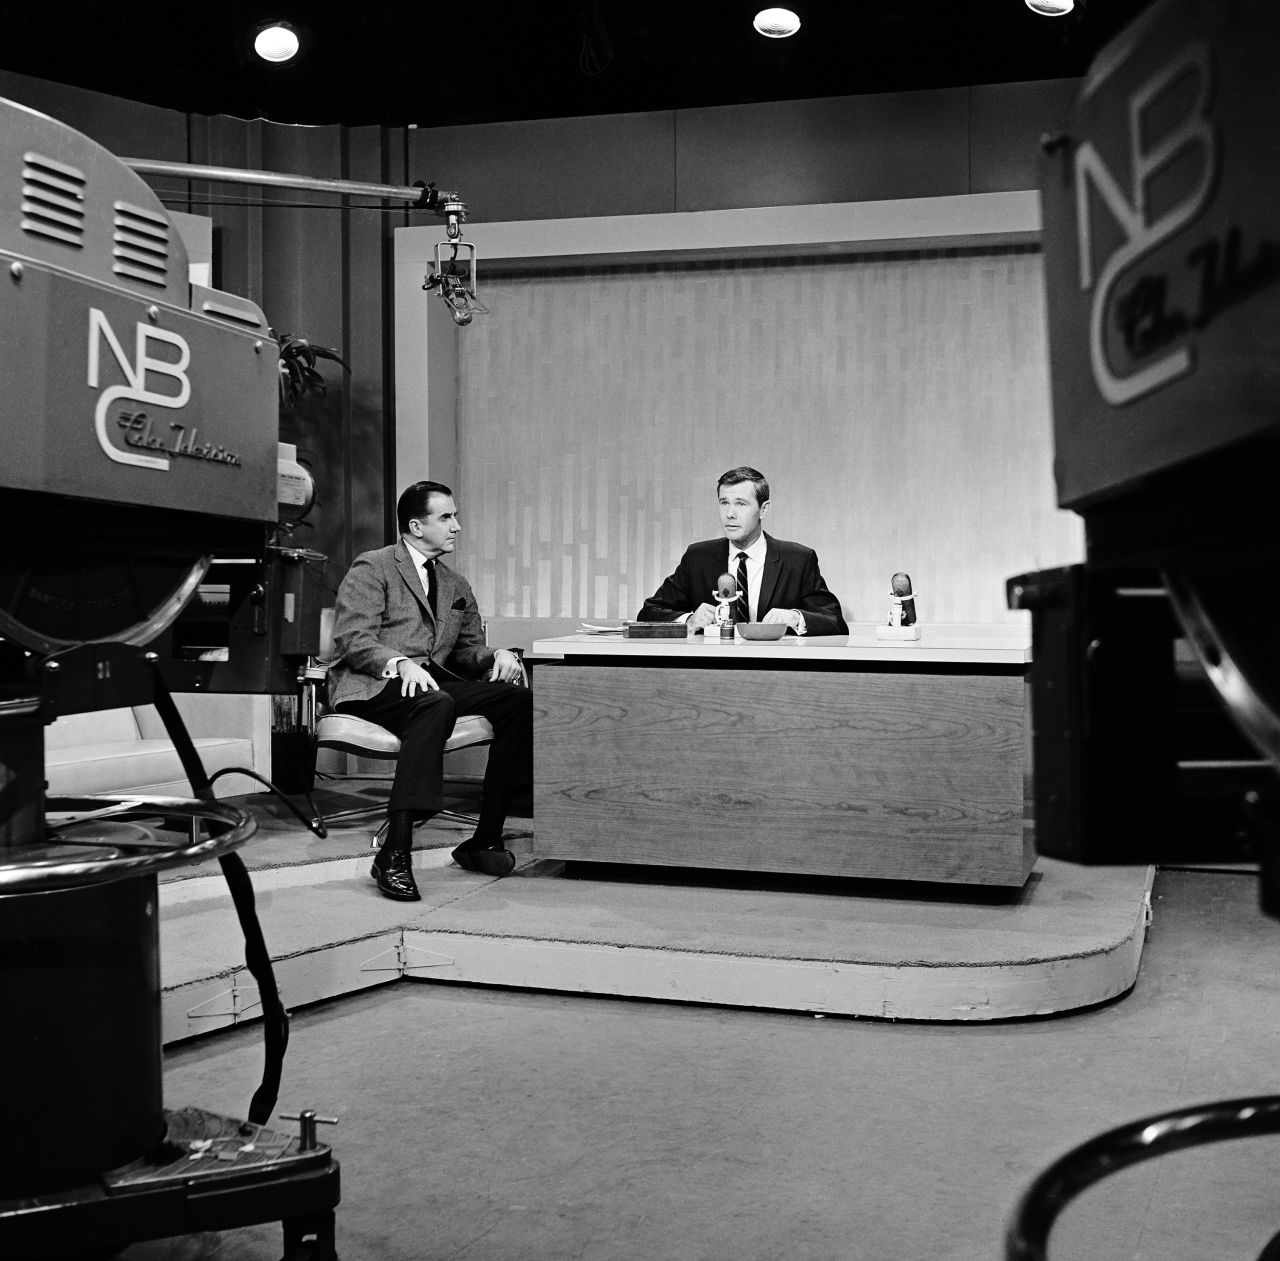 Johnny Carson, with sidekick Ed McMahon, took over NBC's "Tonight Show" on October 1, 1962. Carson became a TV titan, hosting the program for 30 years and <a href="http://www.cnn.com/2005/SHOWBIZ/TV/01/24/carson.appreciation/">setting the bar for every late-night host to follow</a>. 